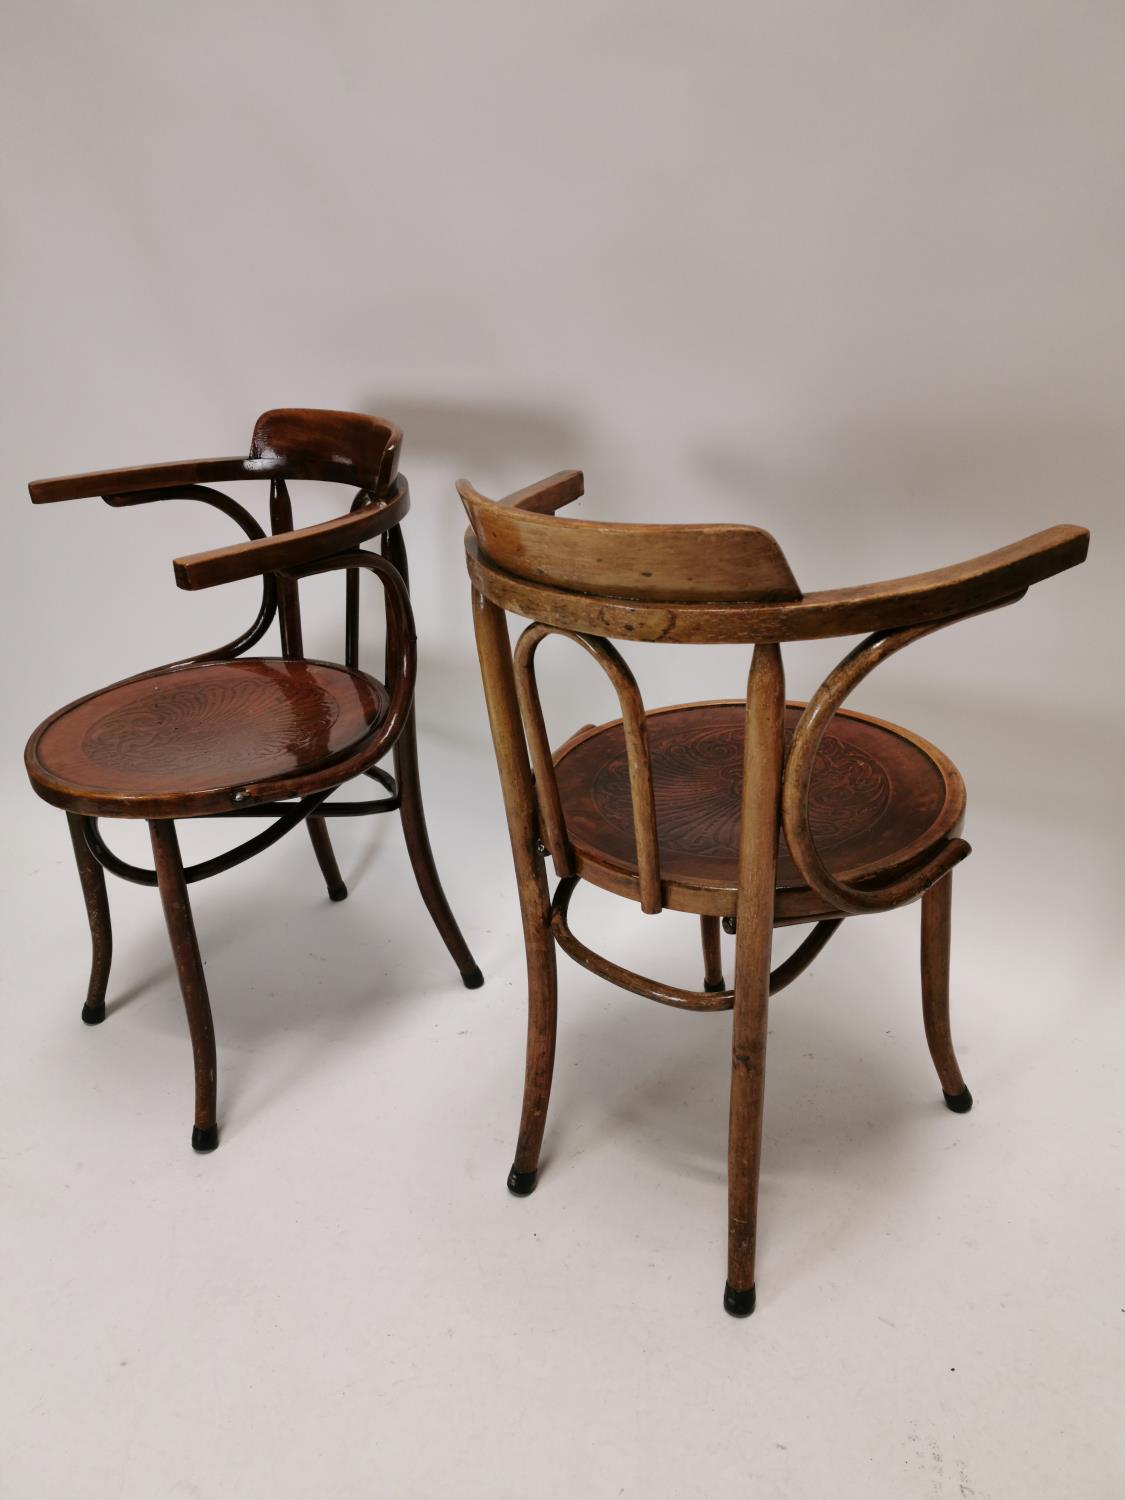 Pair of early 20th C. bent wood arm chairs {83 cm H x 63 cm W x 50 cm D}. - Image 3 of 4